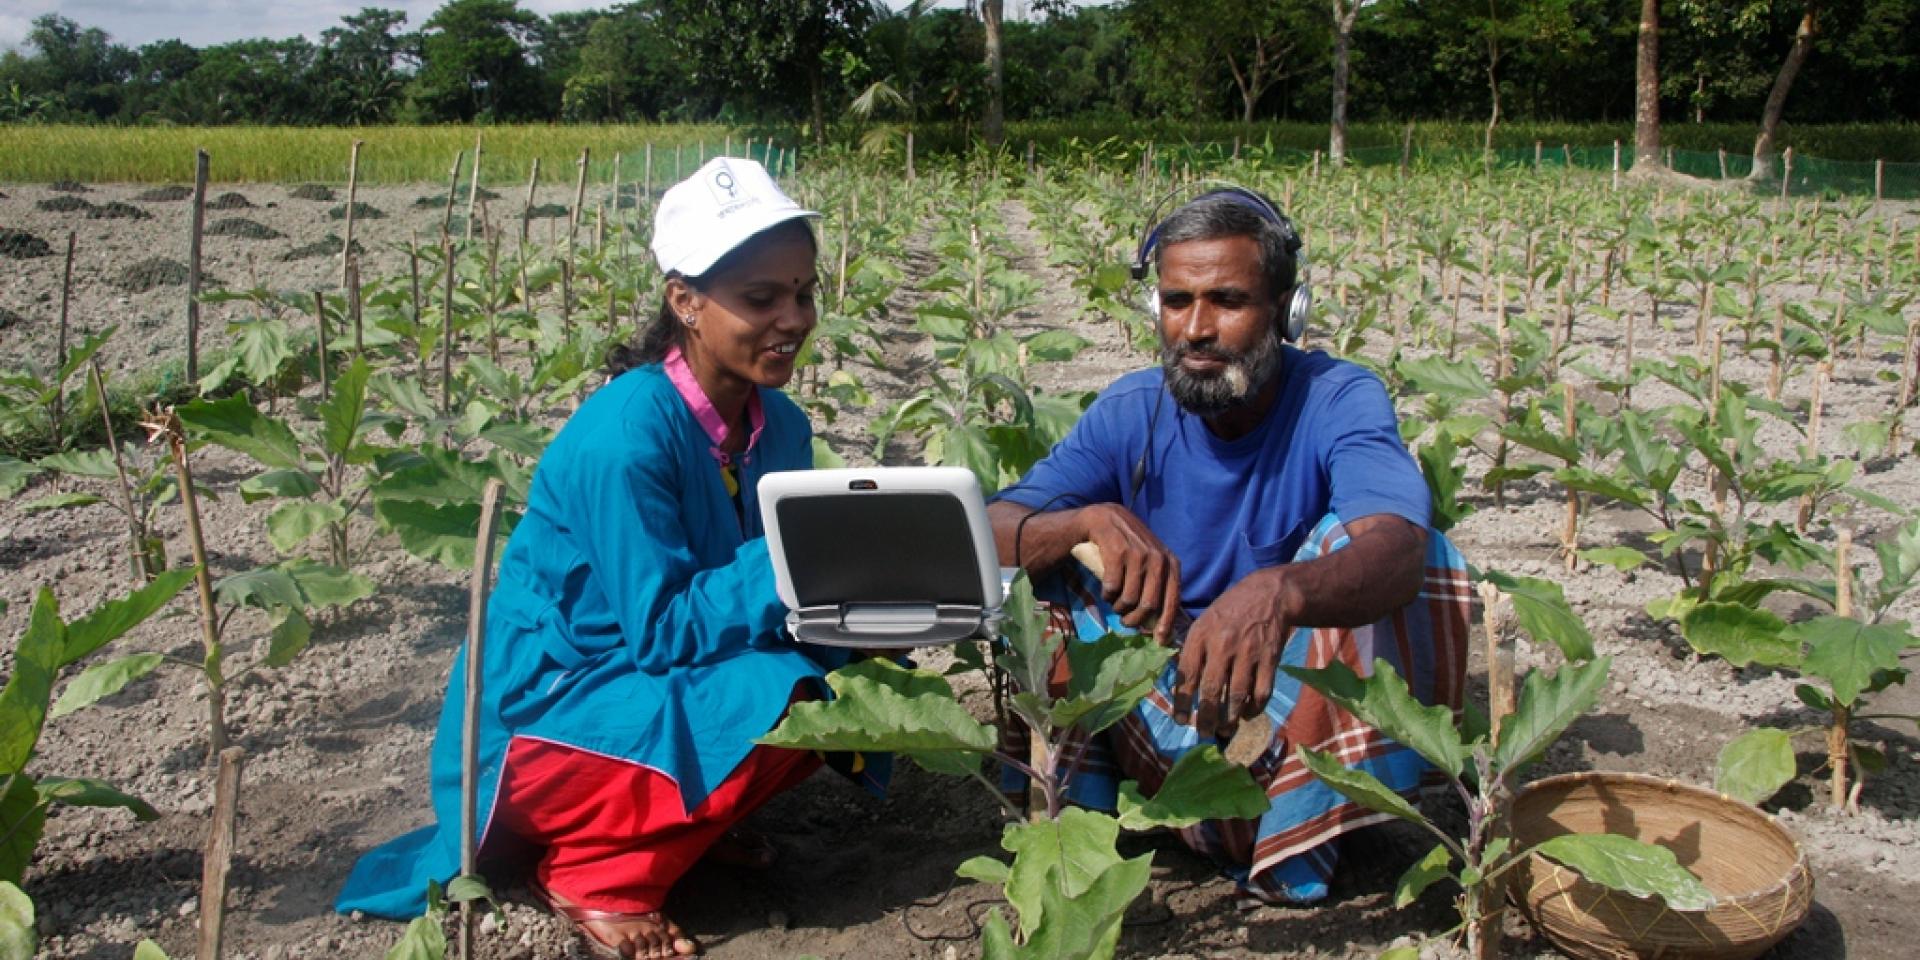 The Cereal Systems Initiative for South Asia project empowered young women by training them to provide ICT-based services to those who lack access to basic information on agriculture